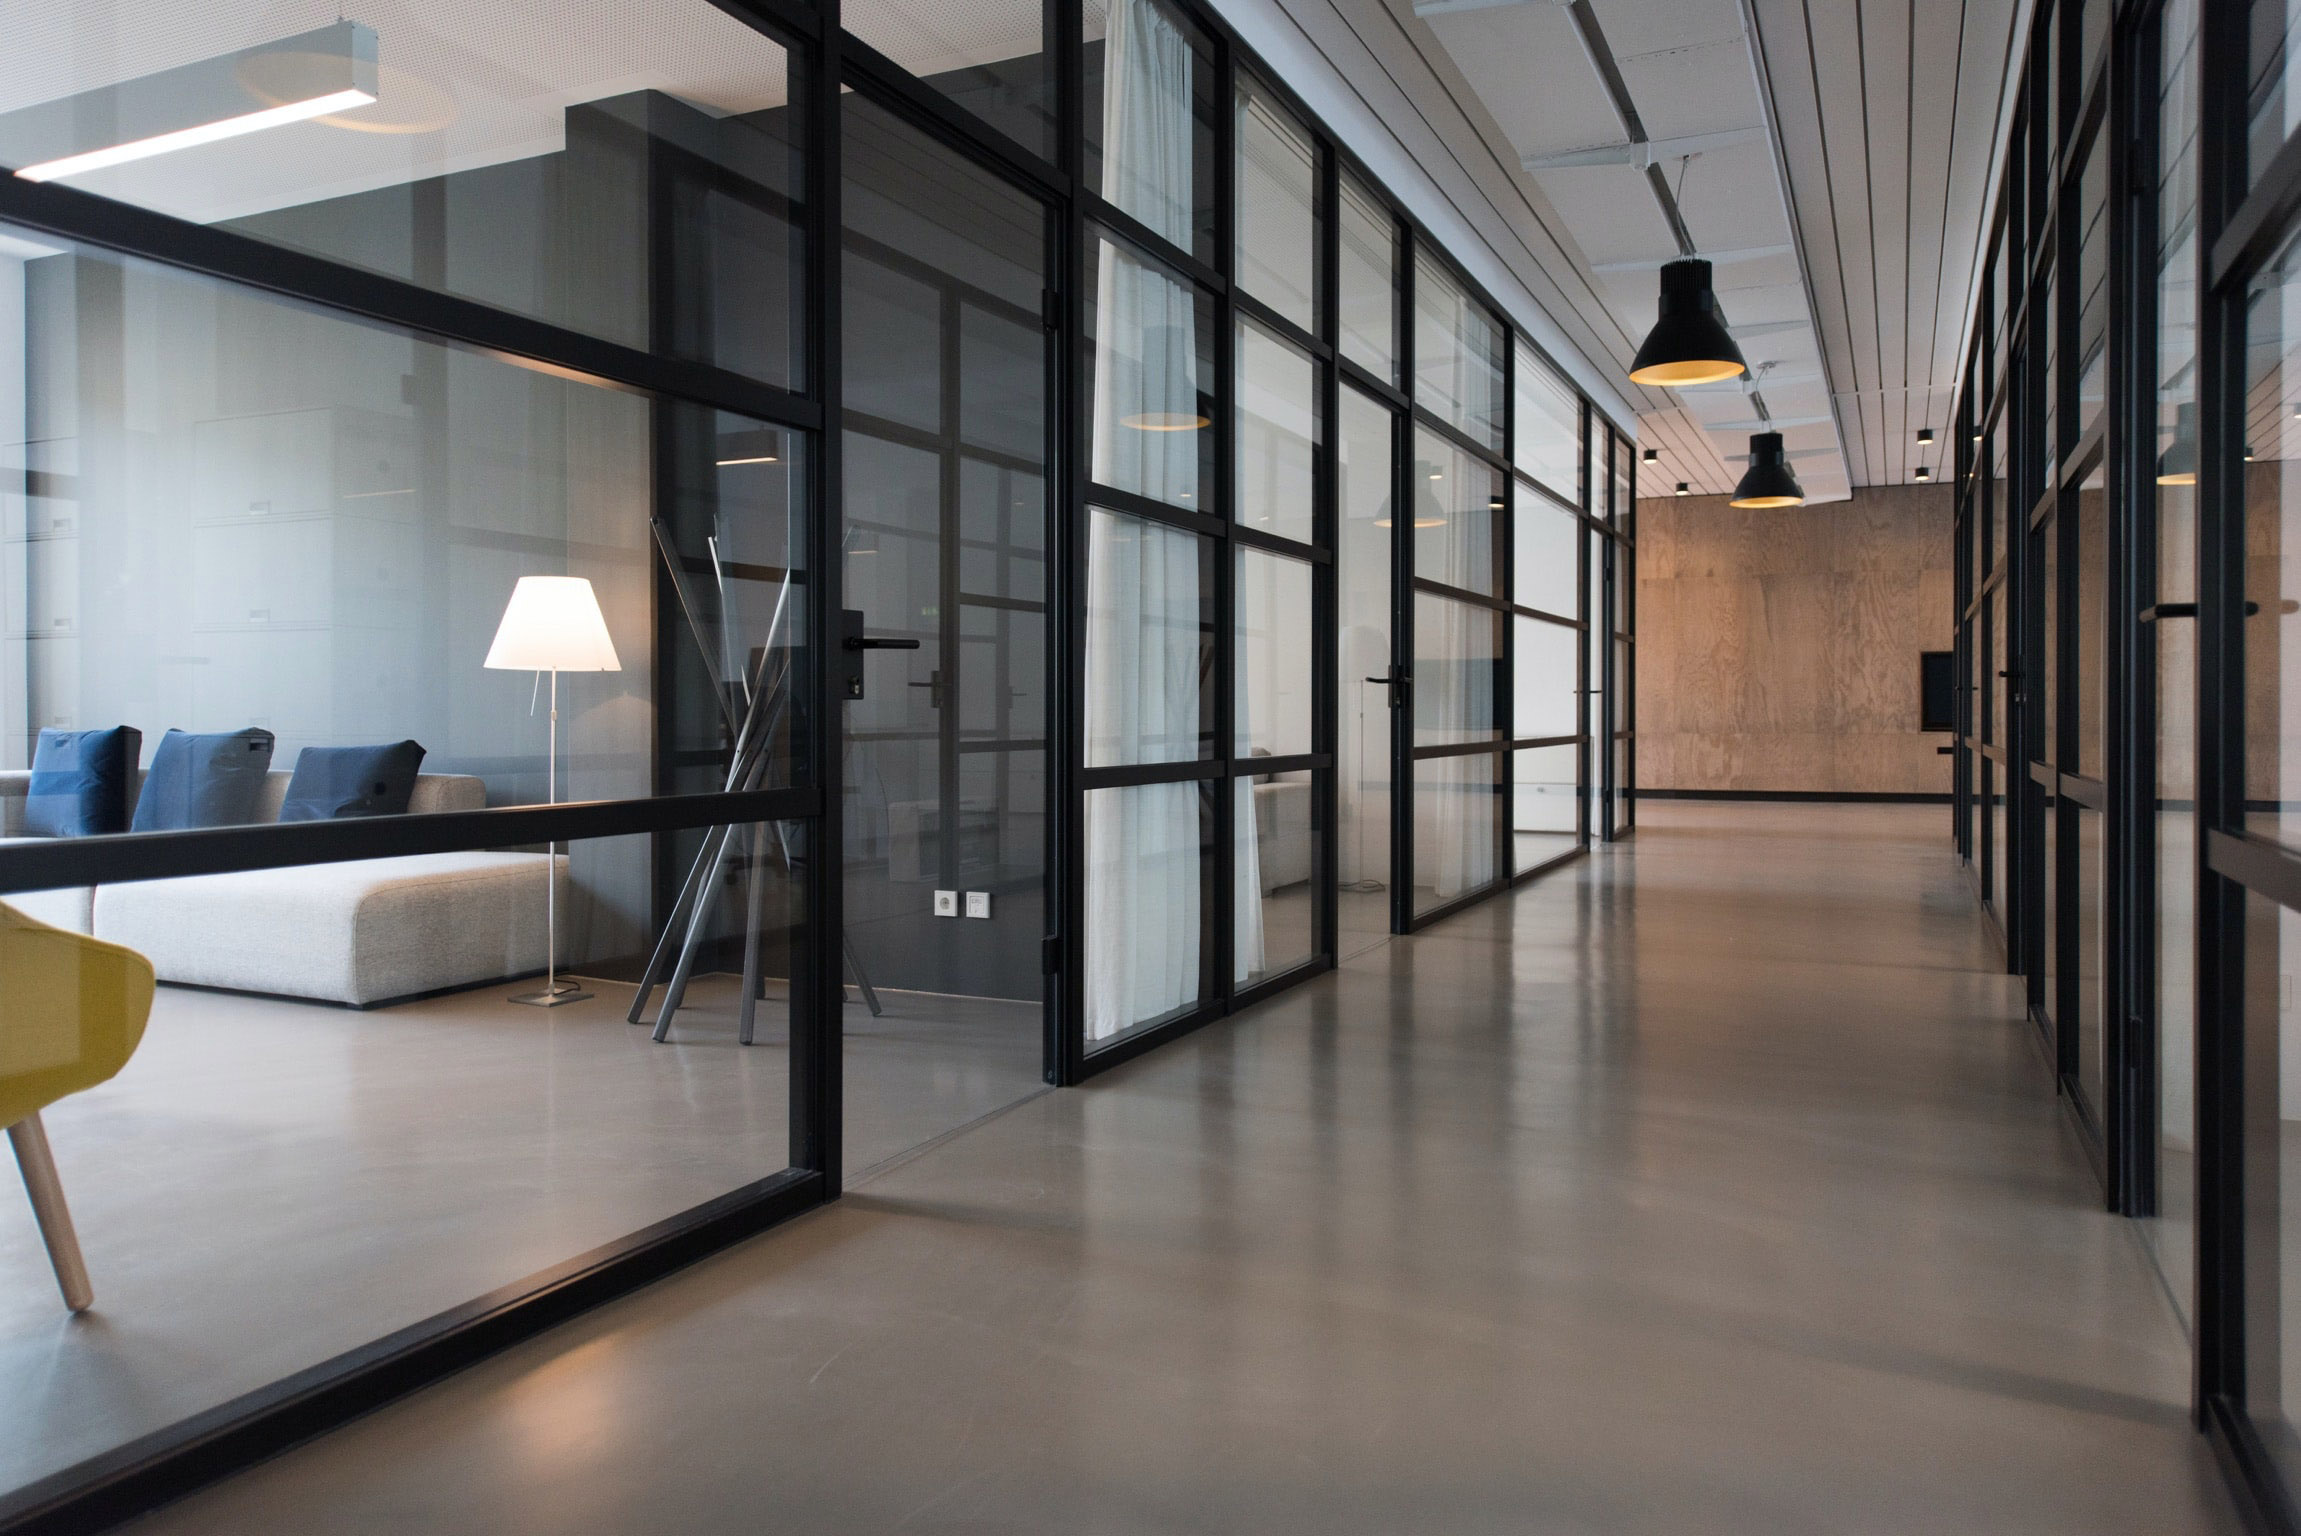 A clean modern looking business hallway with partial view of an office space